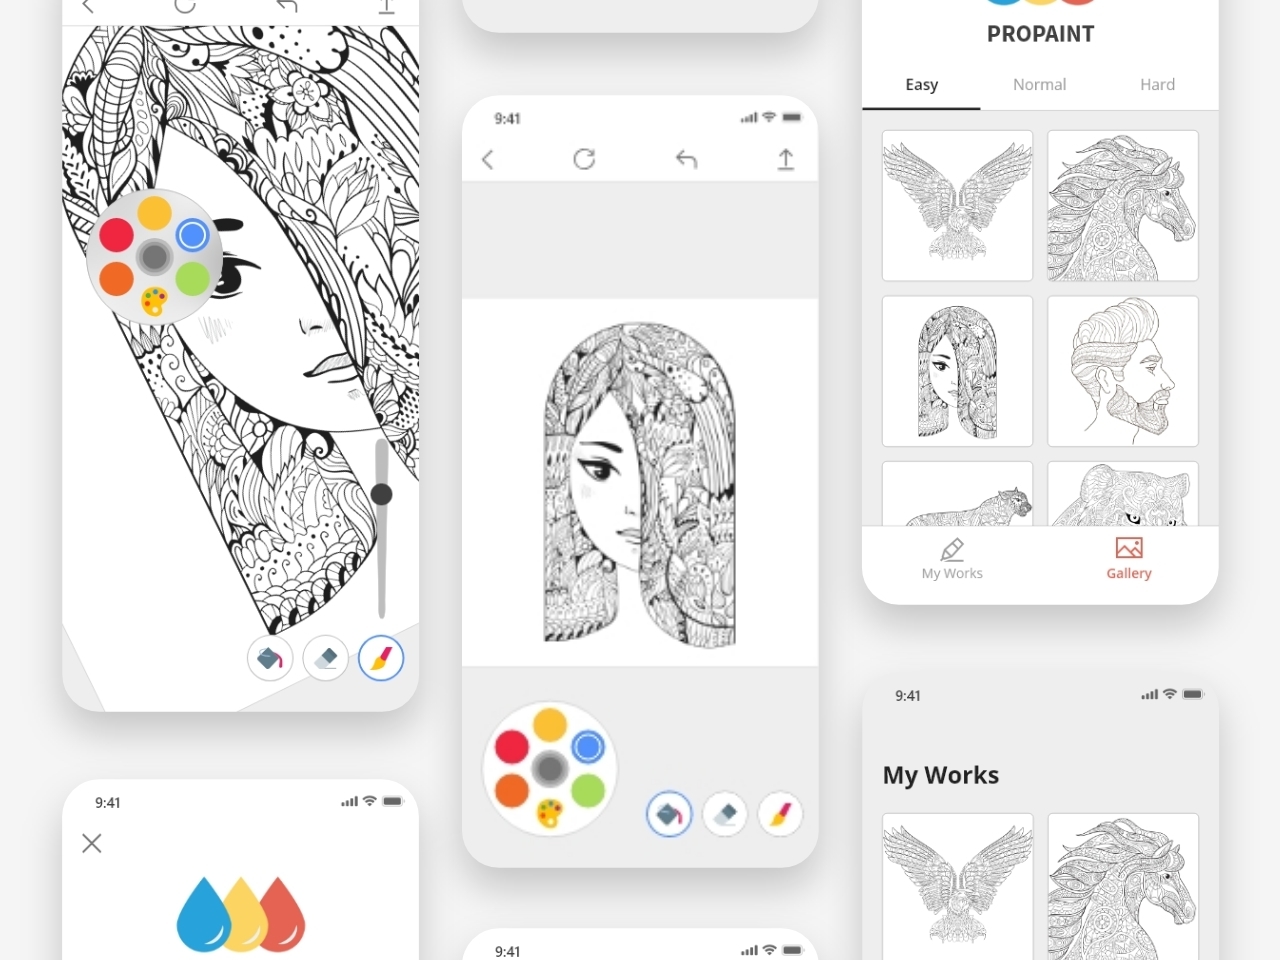 Download Propaint Coloring Book App By Payam Daliri On Dribbble